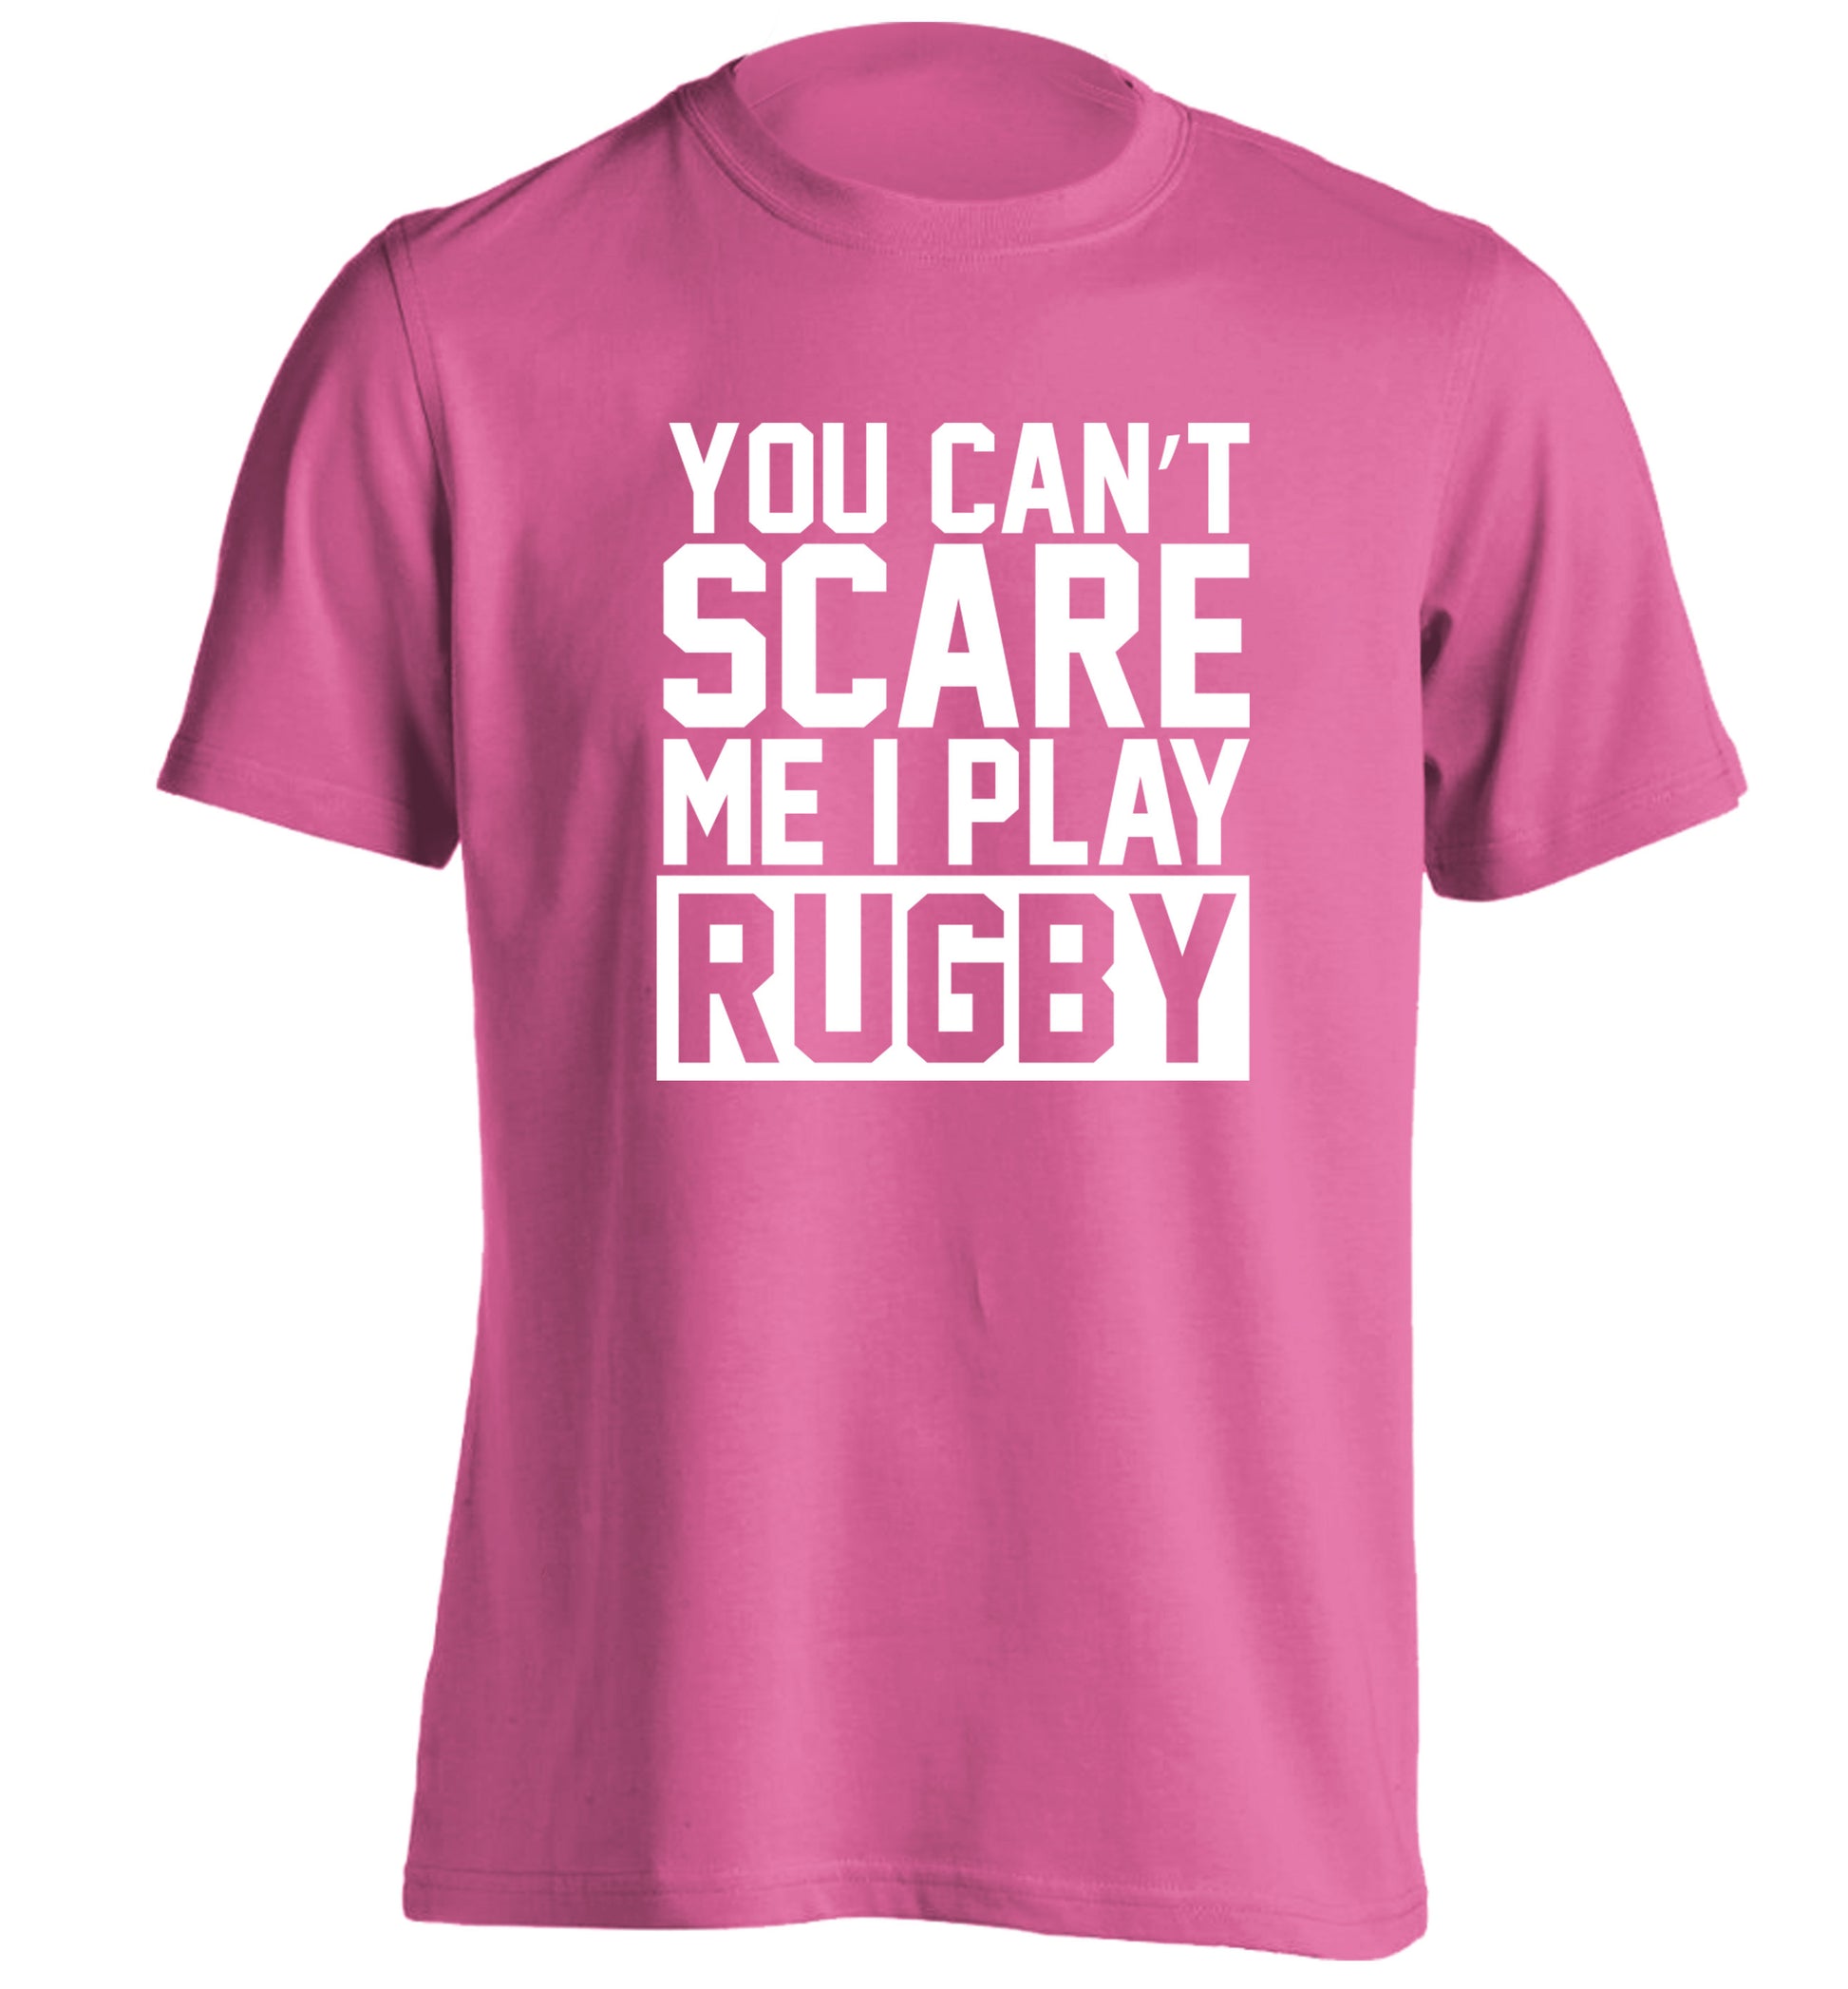 You can't scare me I play rugby adults unisex pink Tshirt 2XL